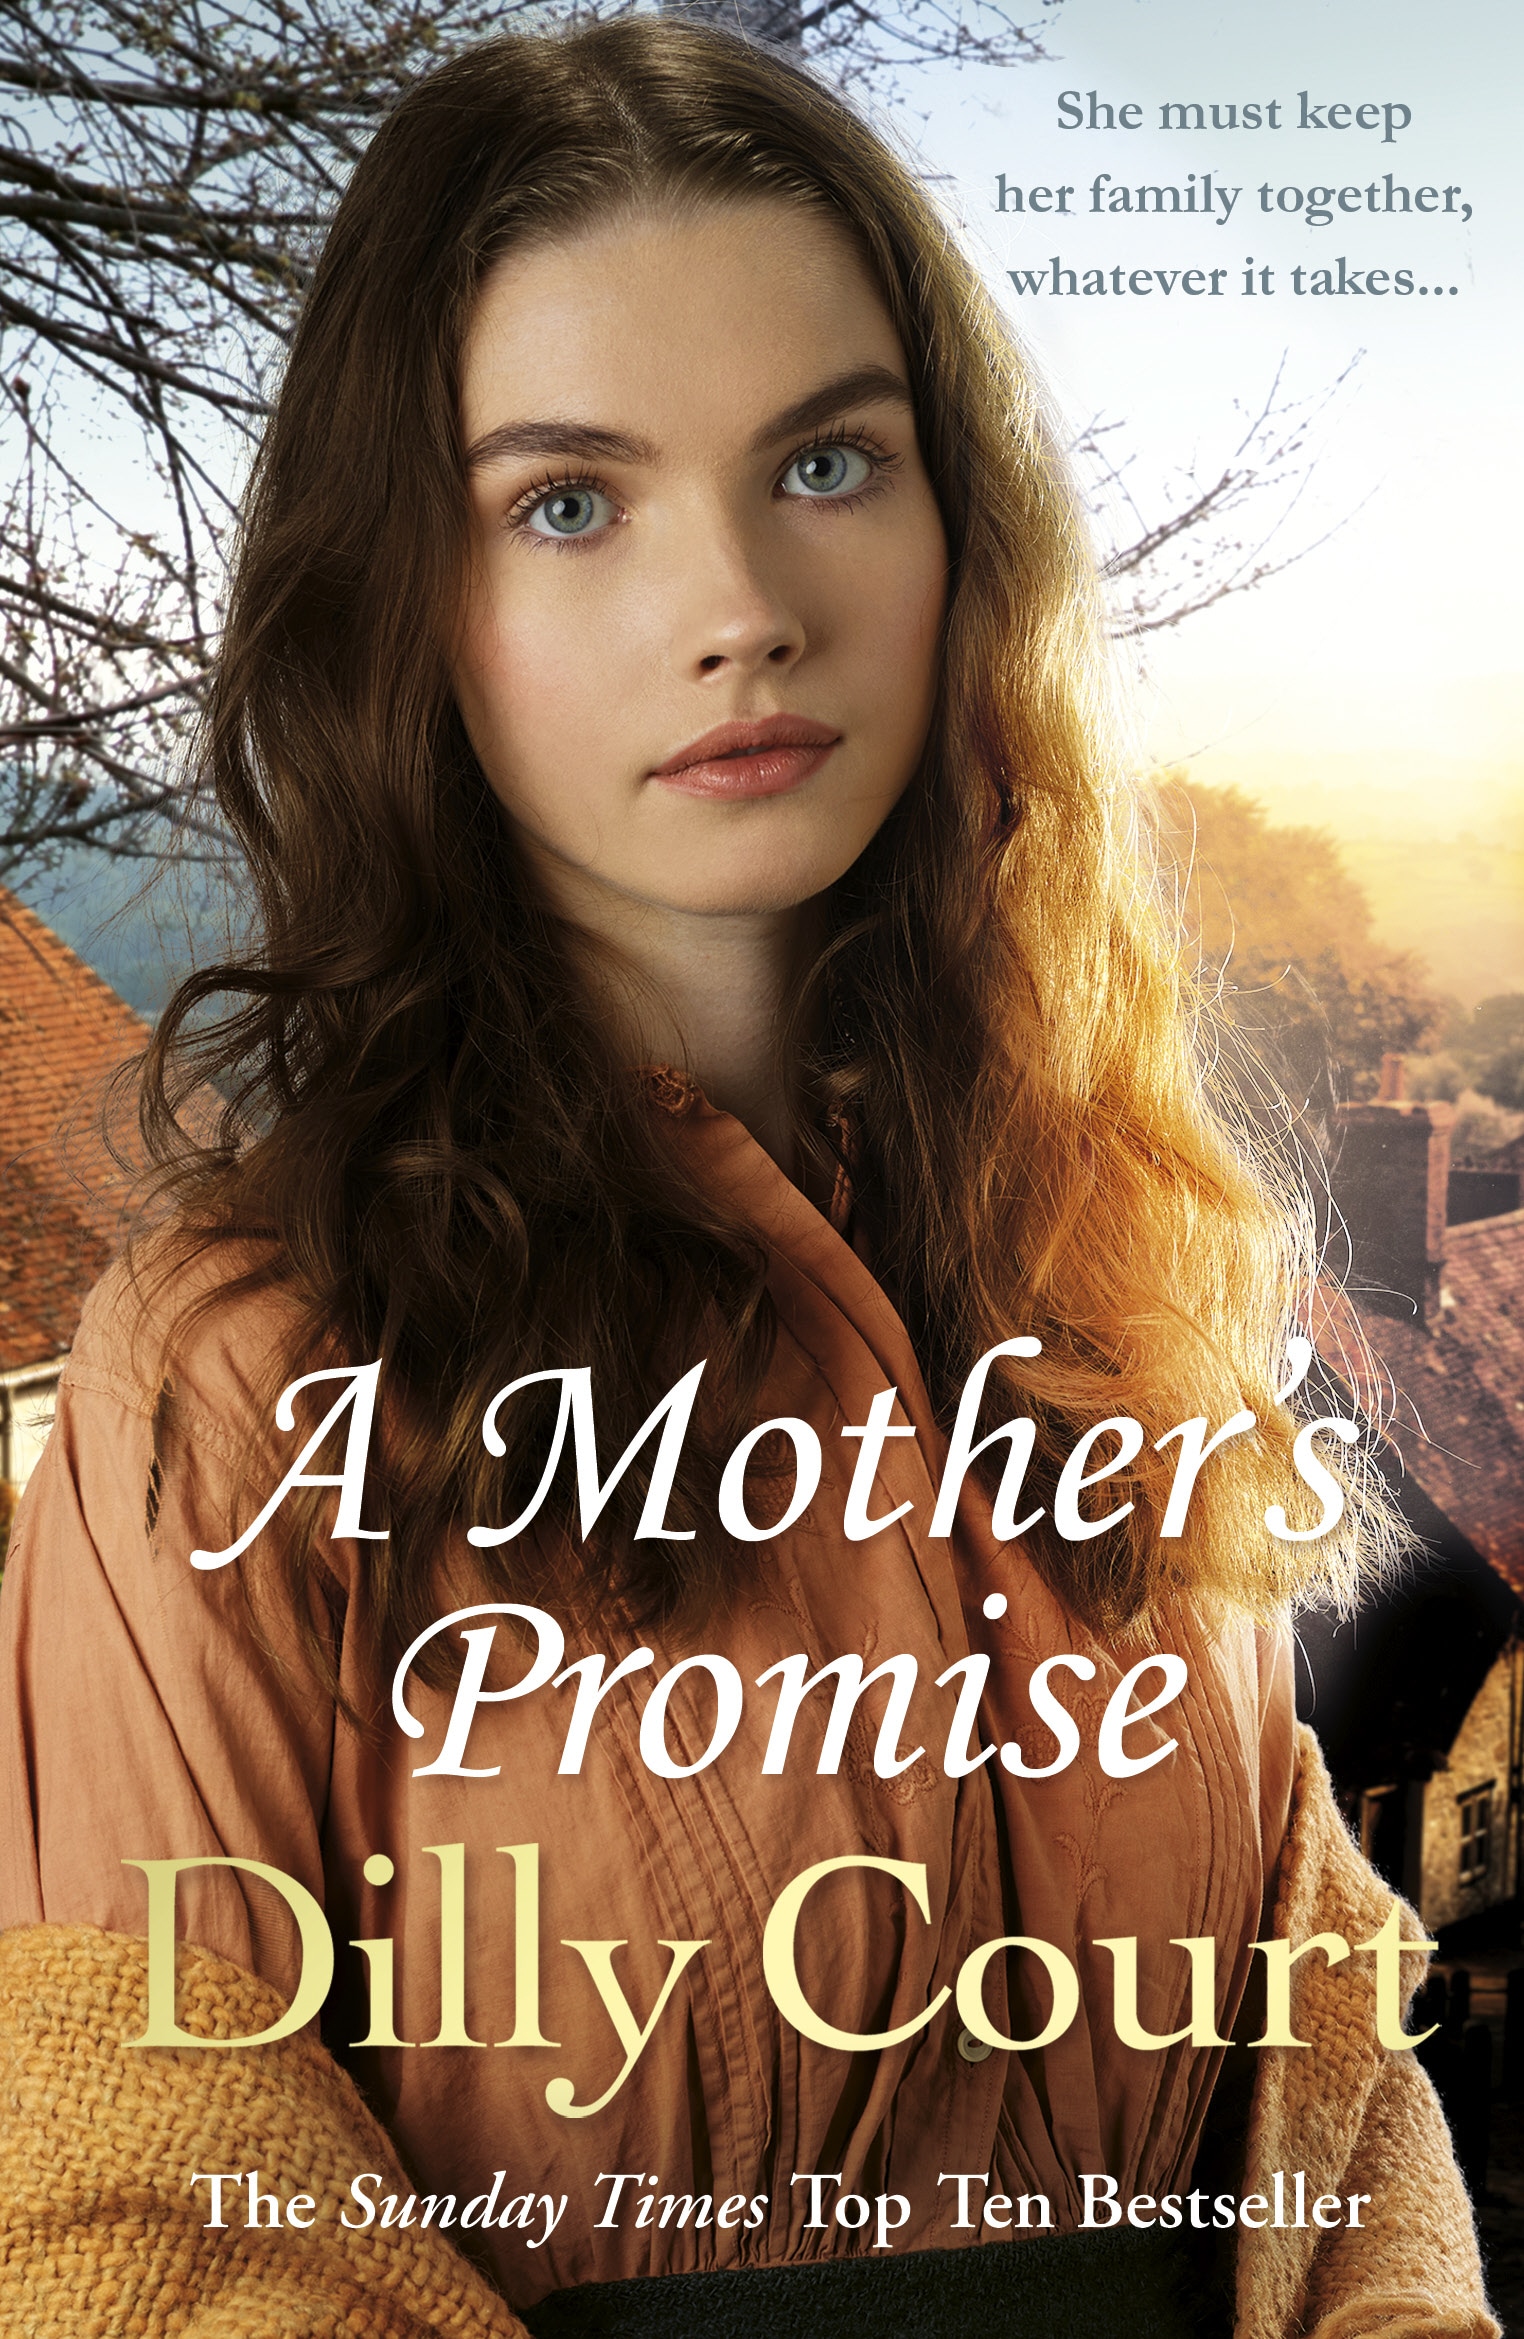 Book “A Mother's Promise” by Dilly Court — August 8, 2019